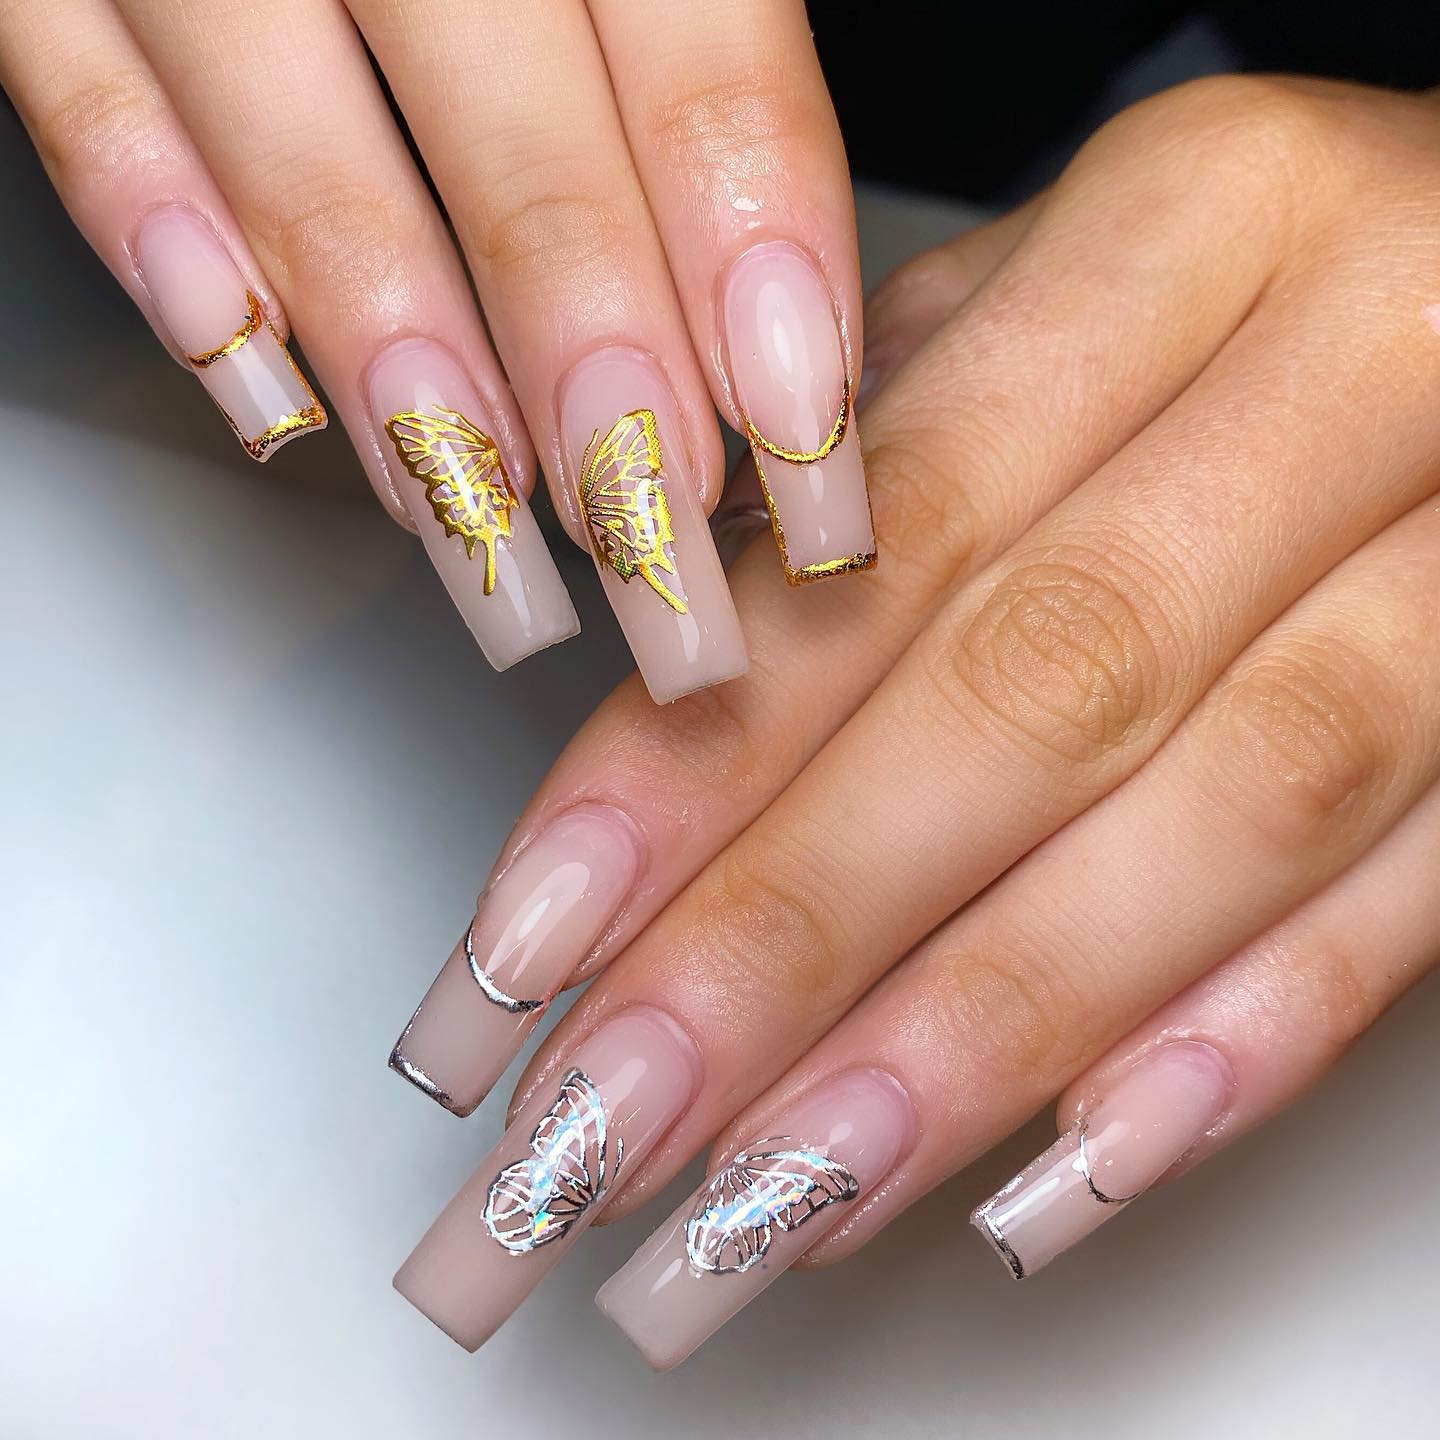 Long Square Nude Nails with Silver and Gold Butterfly Design